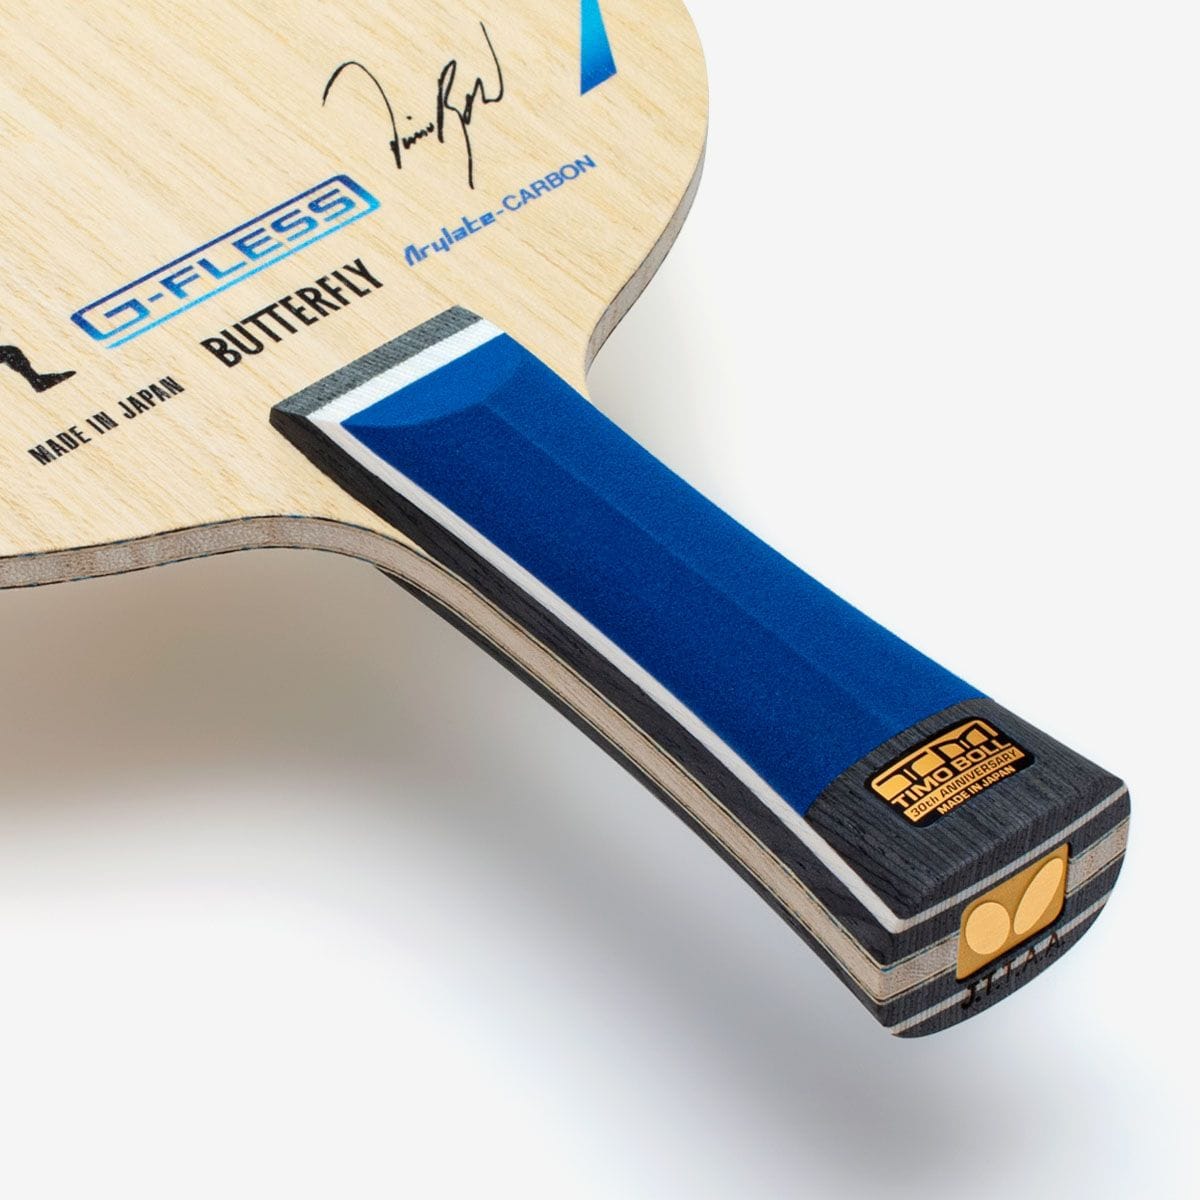 Timo Boll 30th Anniversary Edition｜Products｜Butterfly Global 